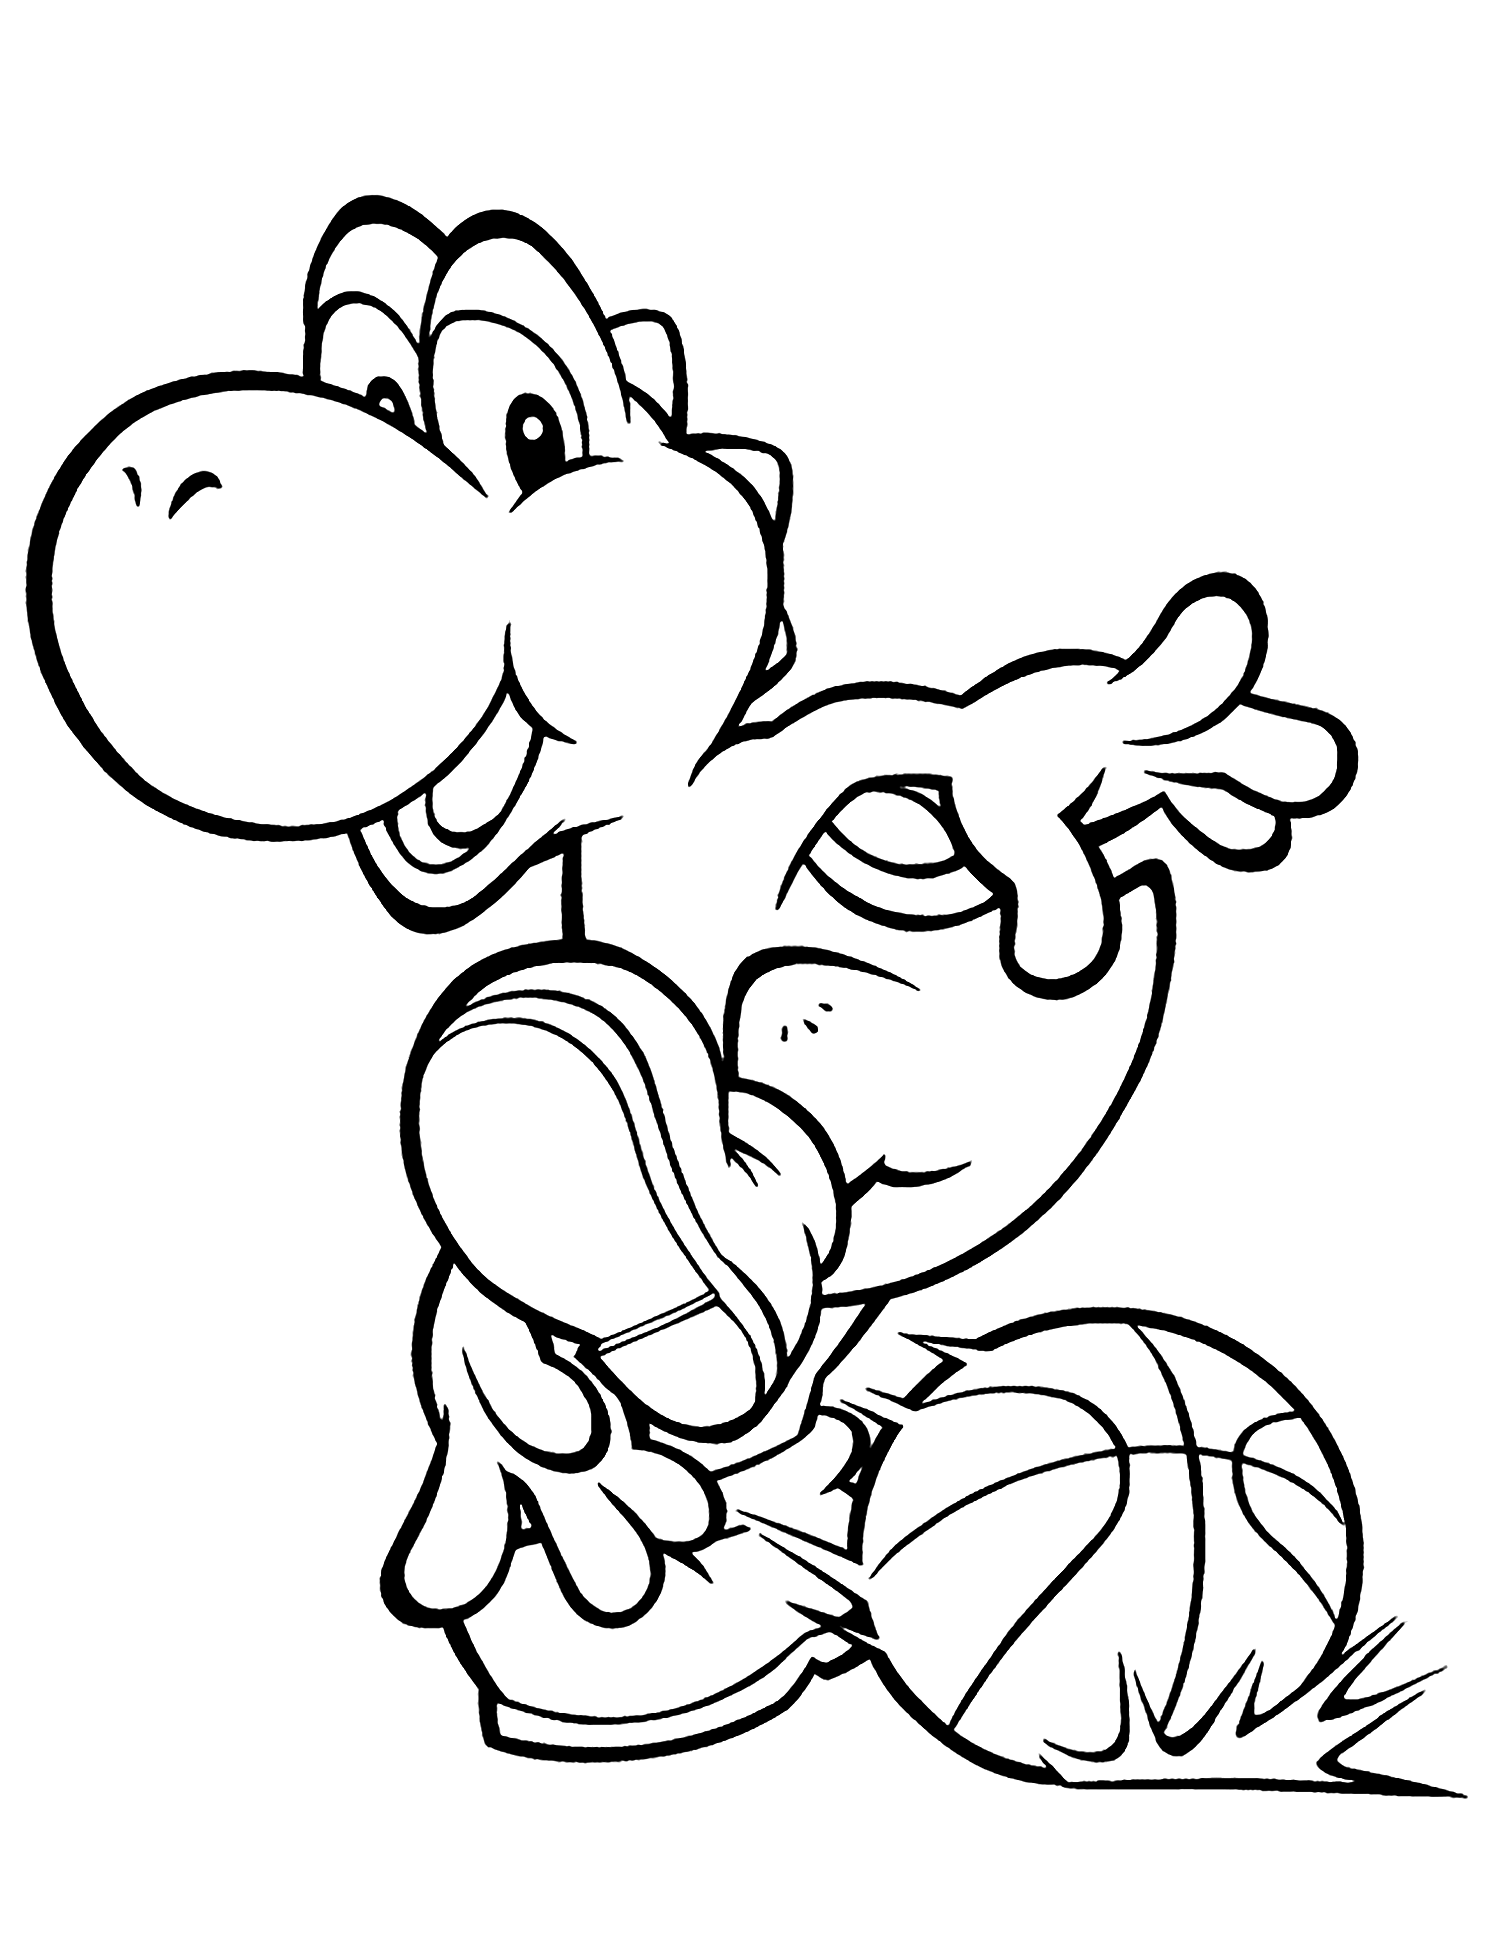 Basketball Coloring Pages For Kids Basketball Kids Coloring Pages